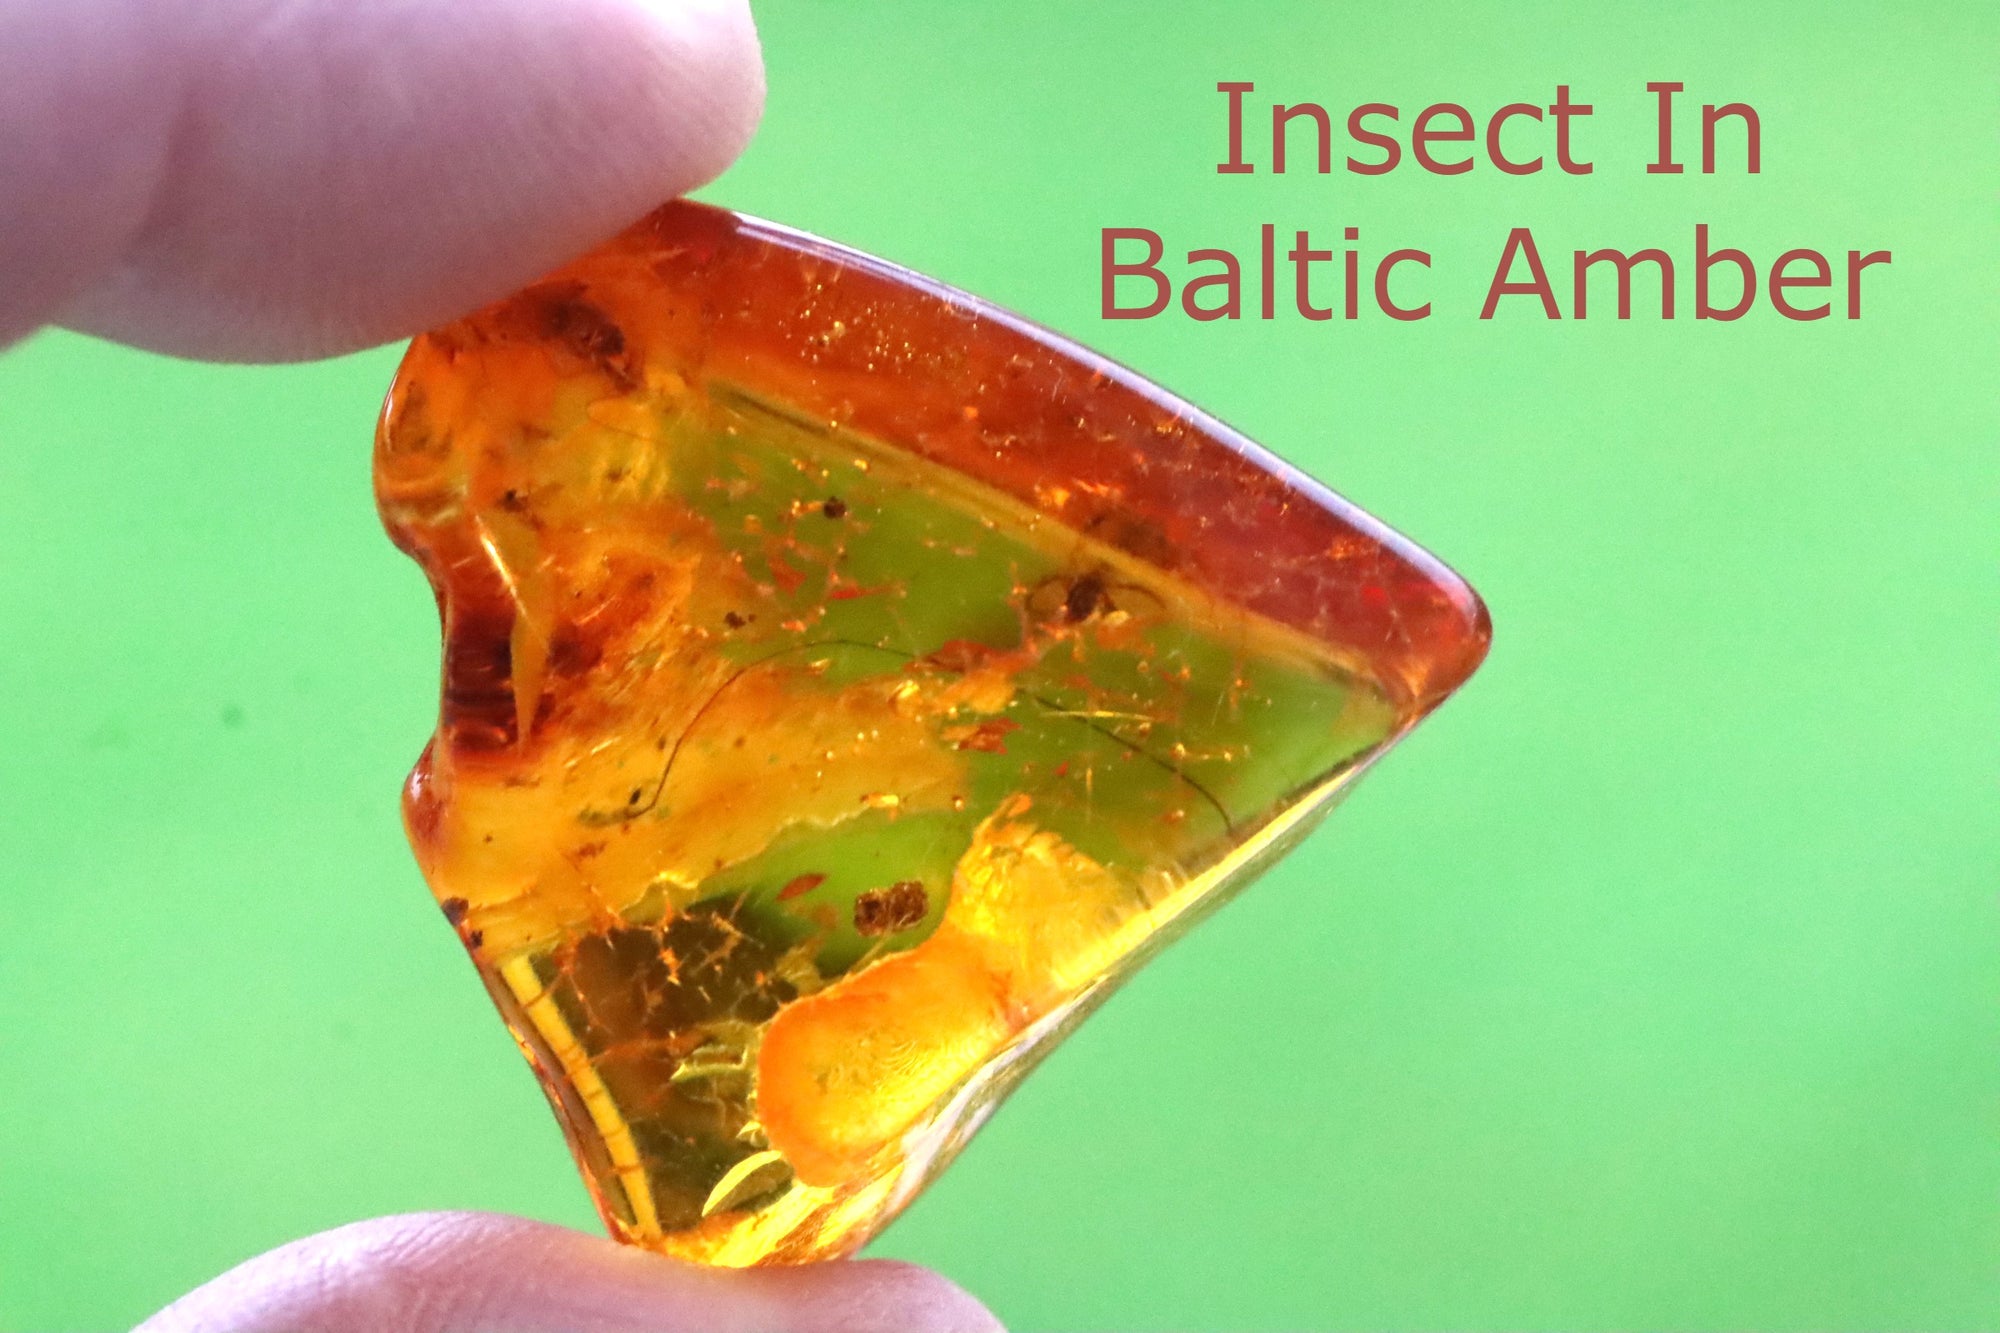 40 million year old Insect Inclusion in Amber